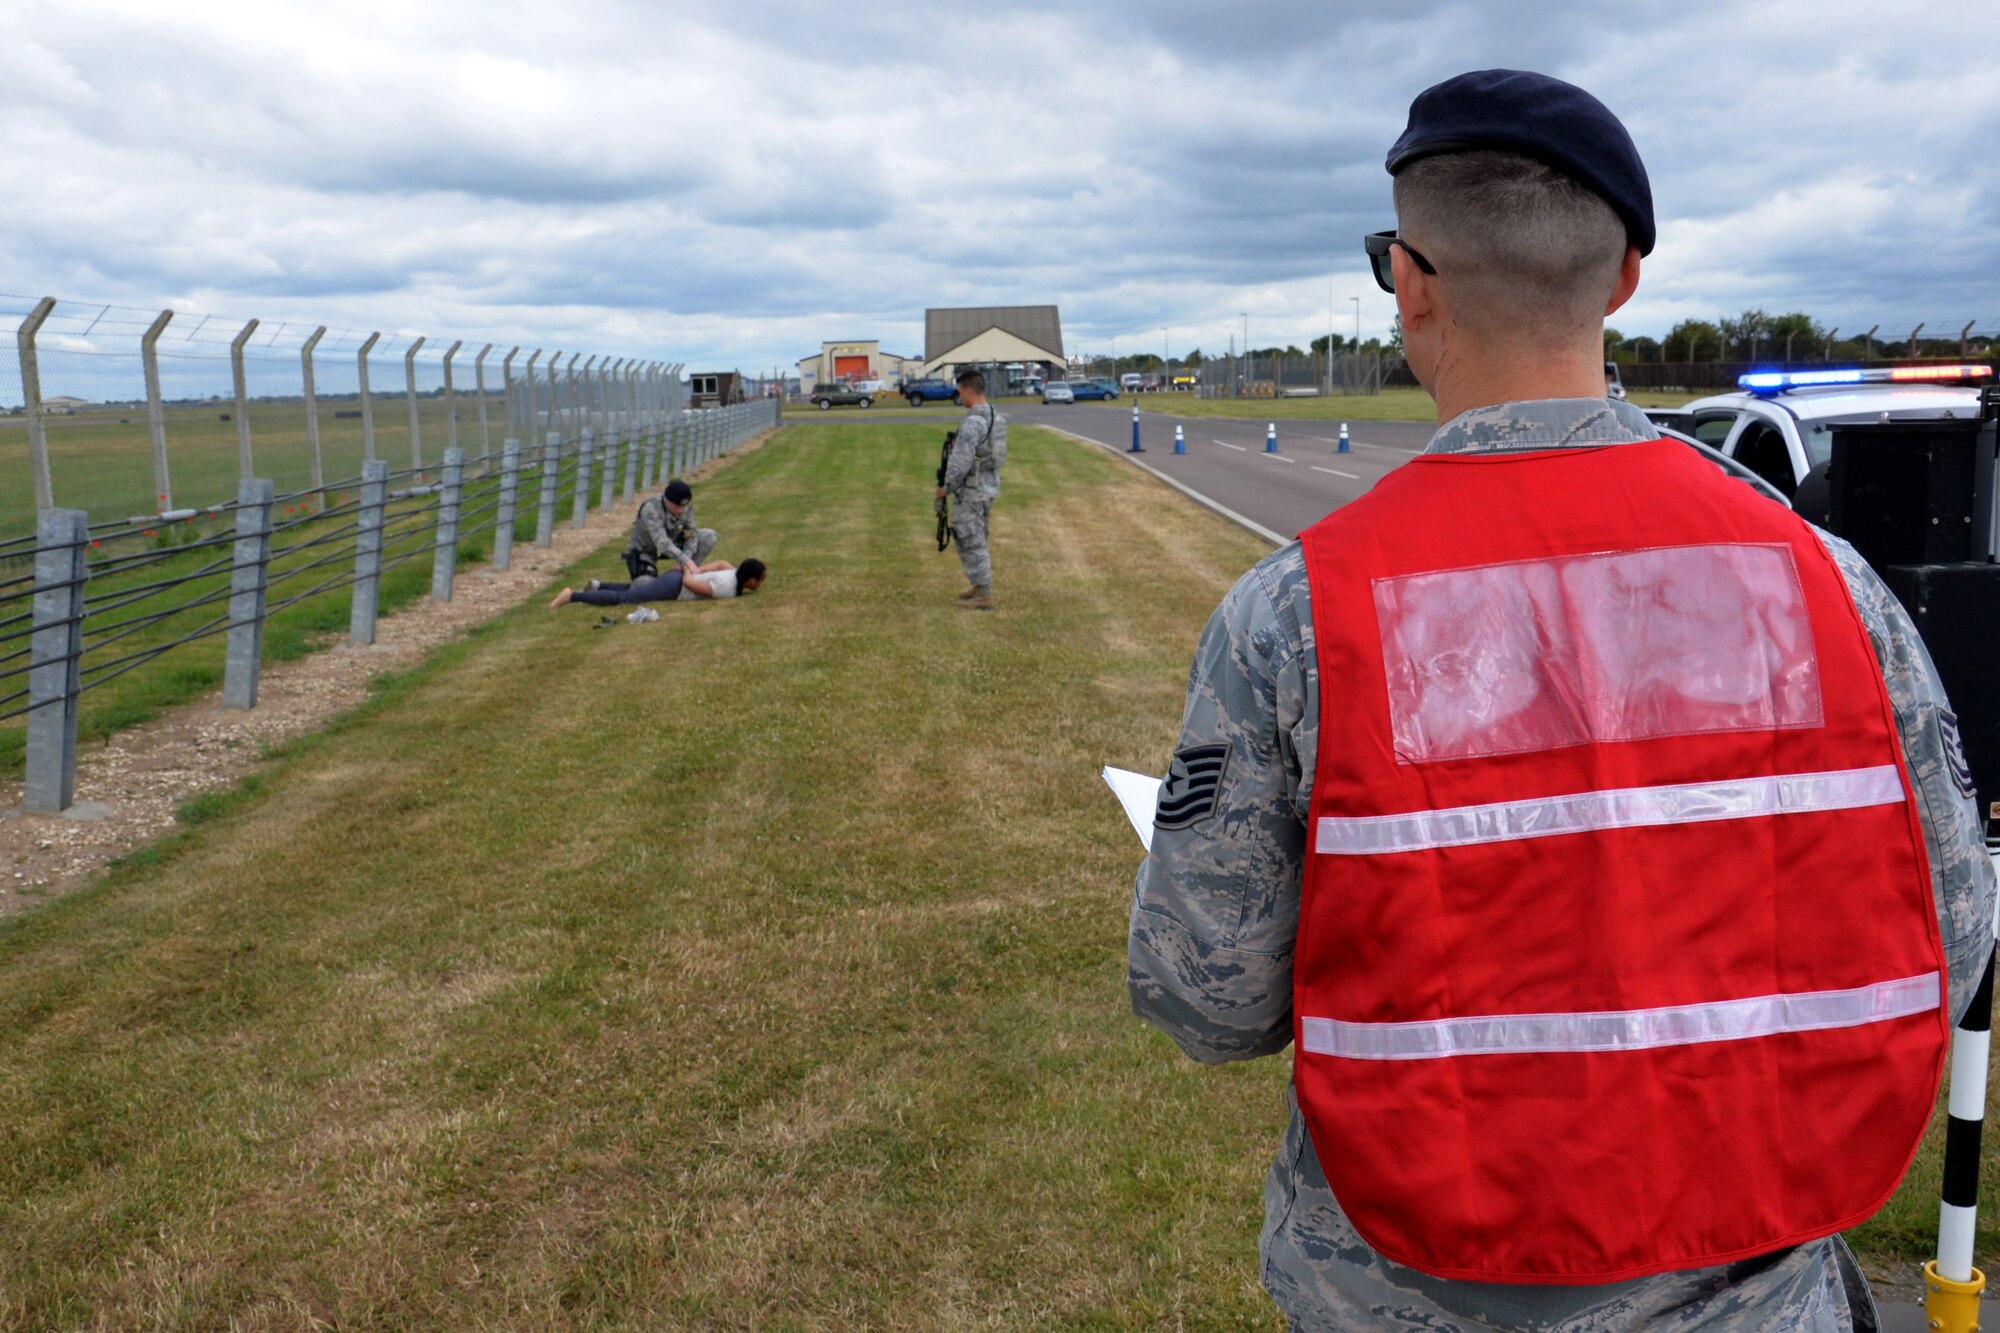 A member of the 100th Air Refueling Wing inspection team observes as U.S. Airmen from the 100th Security Forces Squadron search a simulated suspect during an exercise at RAF Mildenhall, England, June 20, 2018. Such exercises are regularly scheduled to test responsiveness and readiness of base personnel. (U.S. Air Force photo by Tech. Sgt. David Dobrydney)